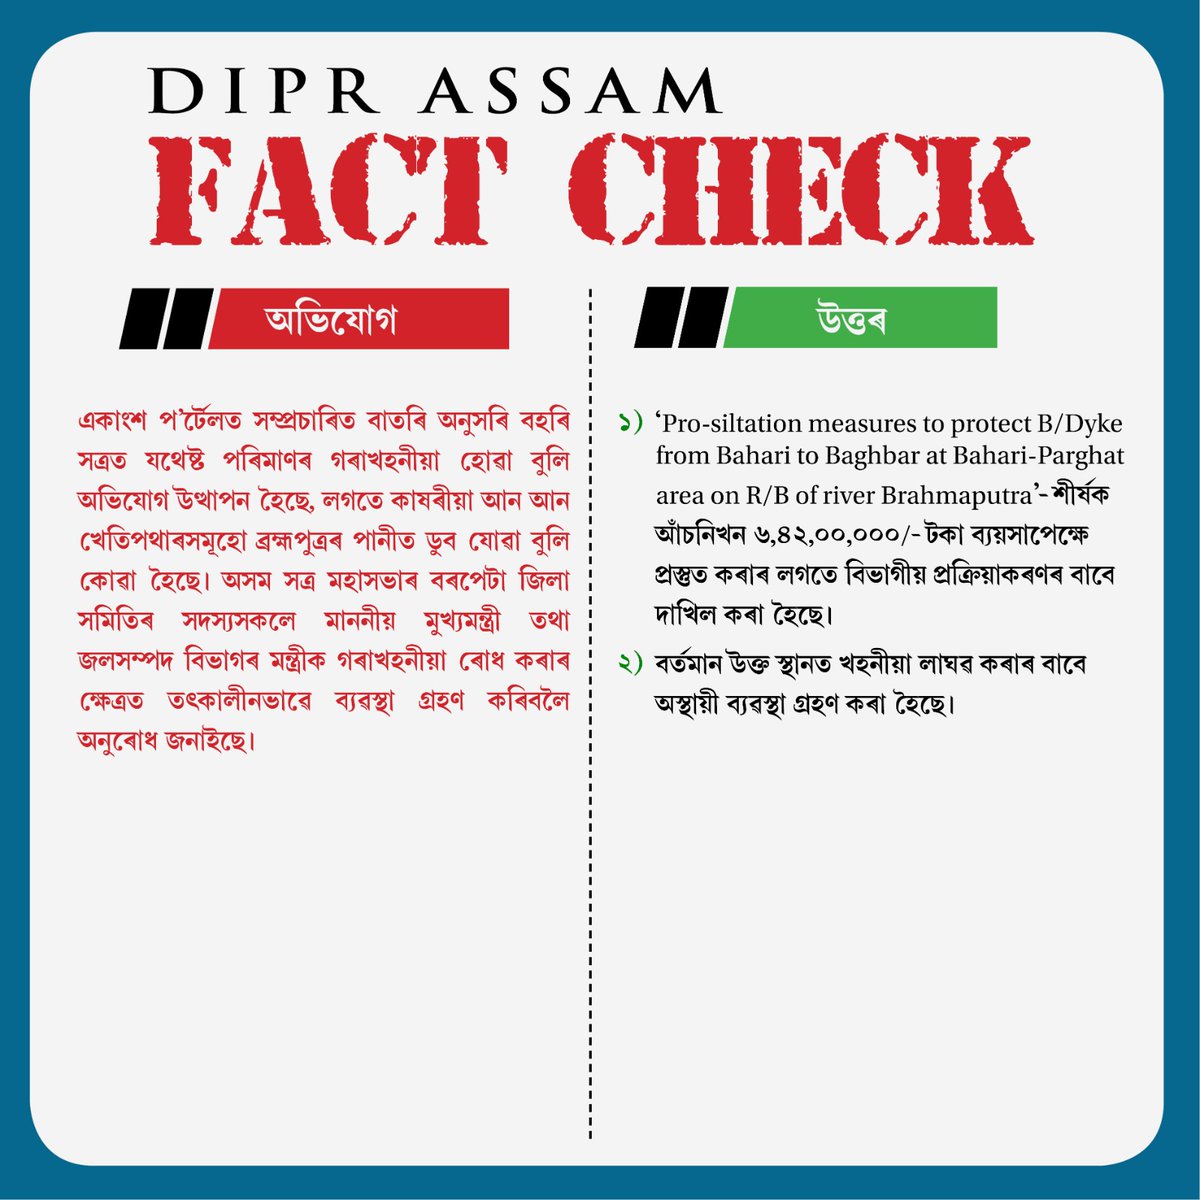 #DIPRAssamFactCheck | Response from the Water Resources Department, Govt of Assam regarding a news report about soil erosion near Bahari Satra, as published by a few news portals.